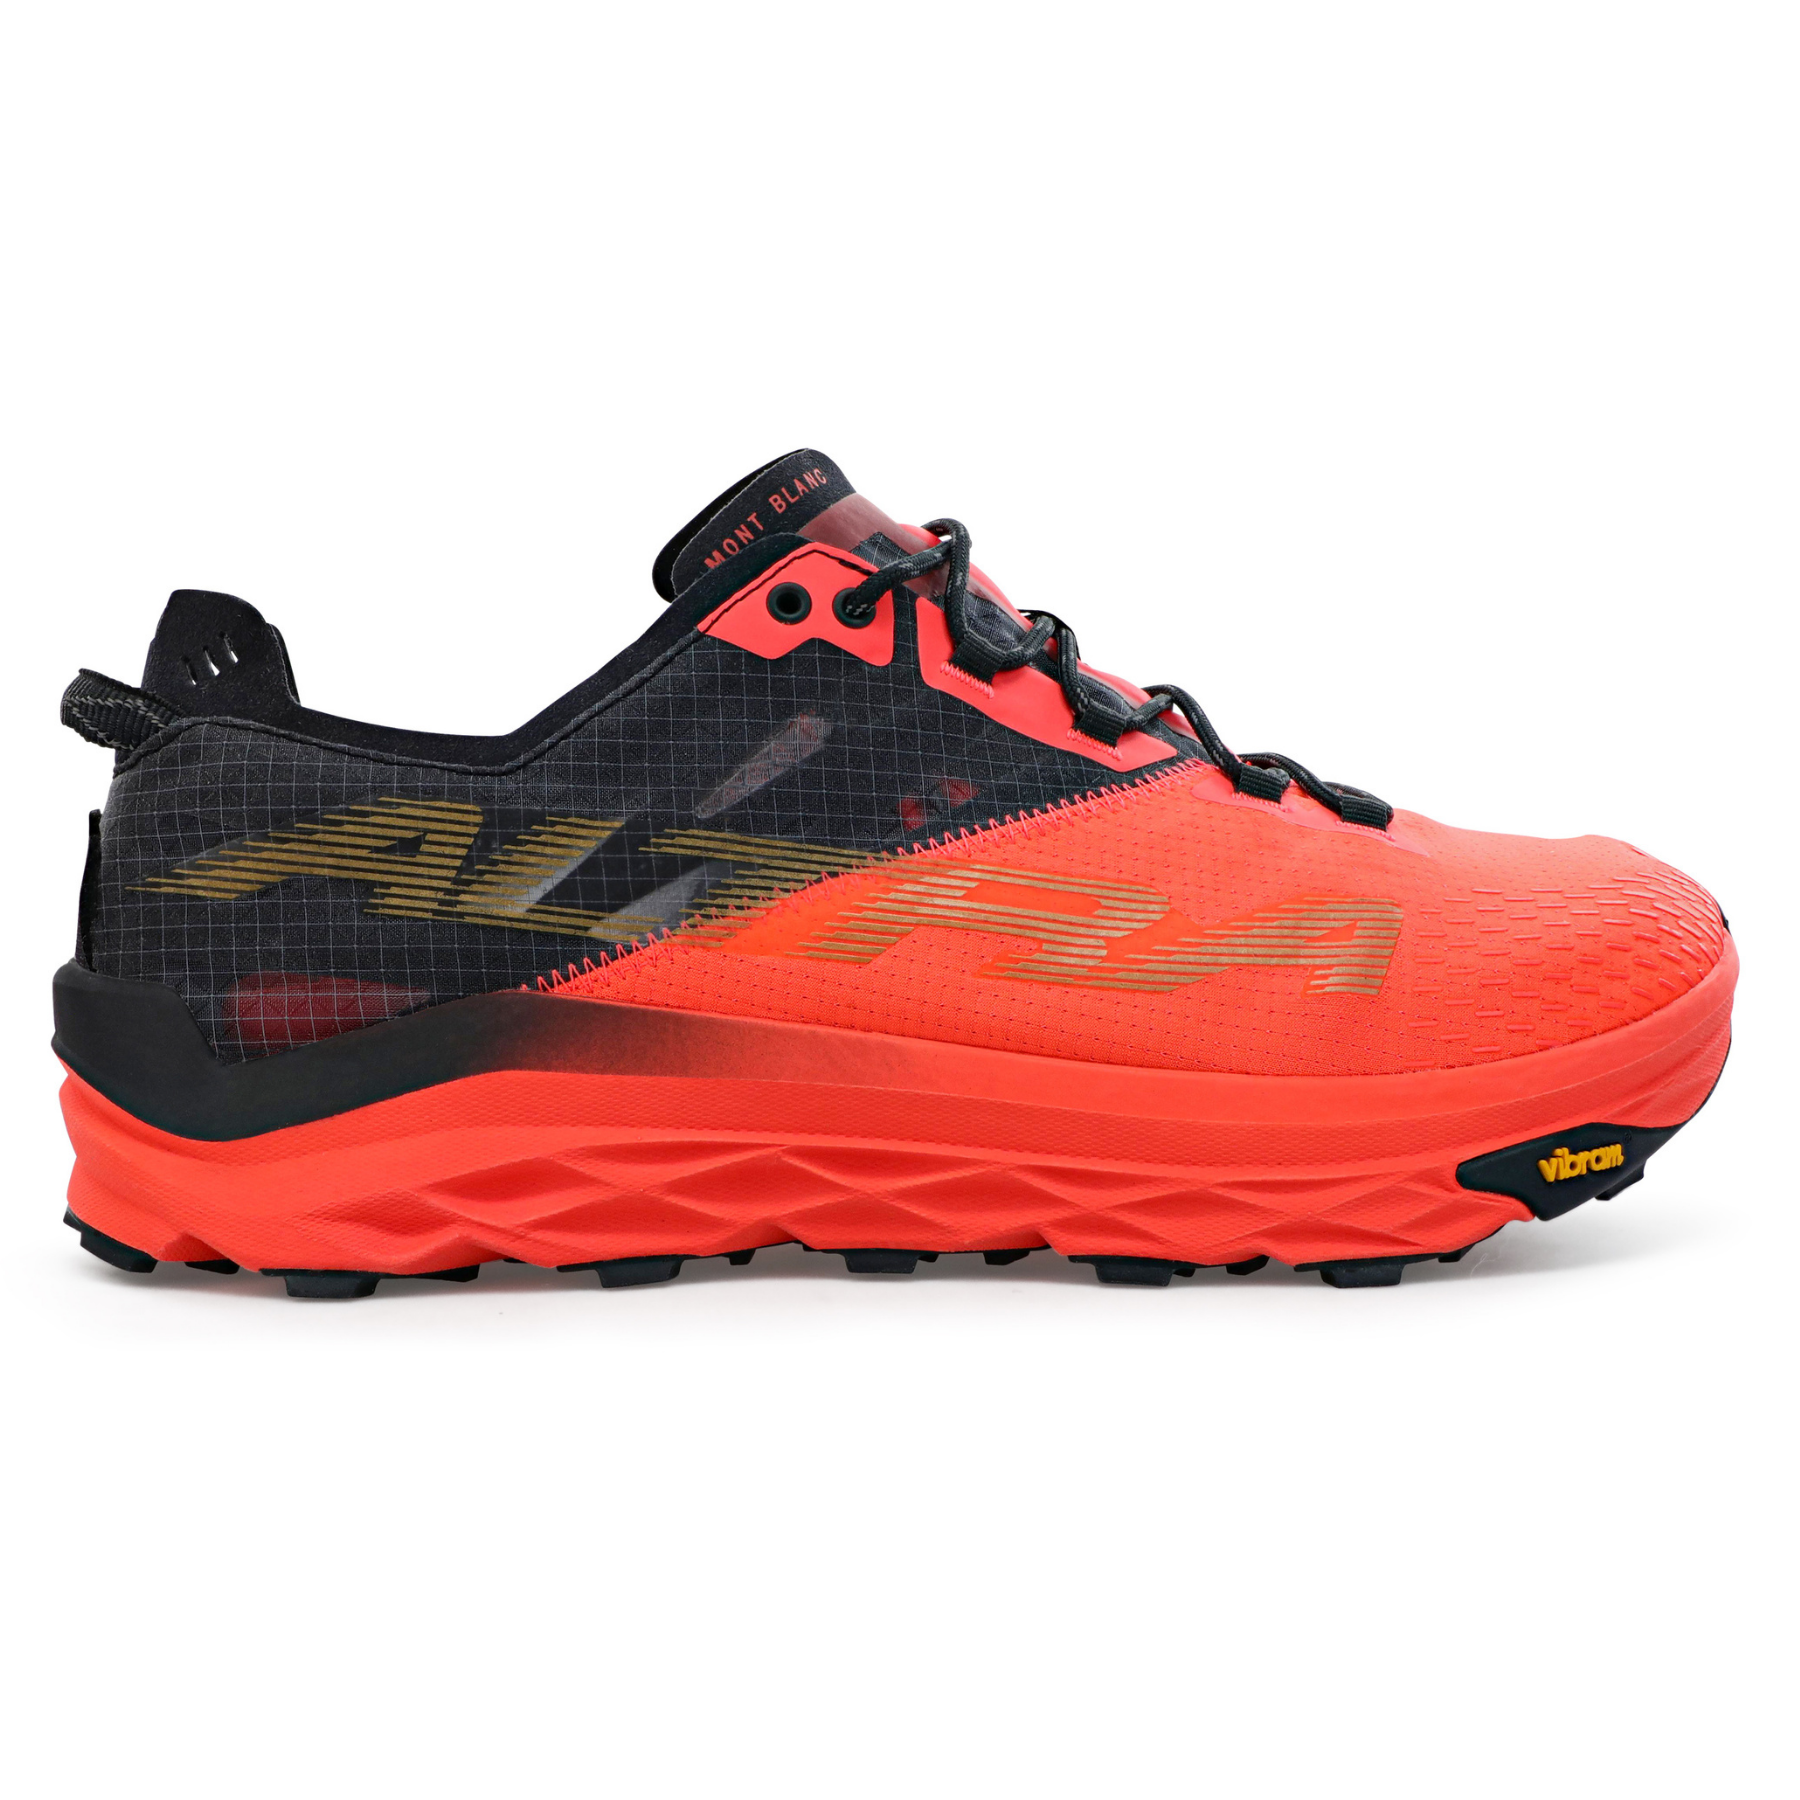 Altra Mont Blanc - Trail running shoes - Women's